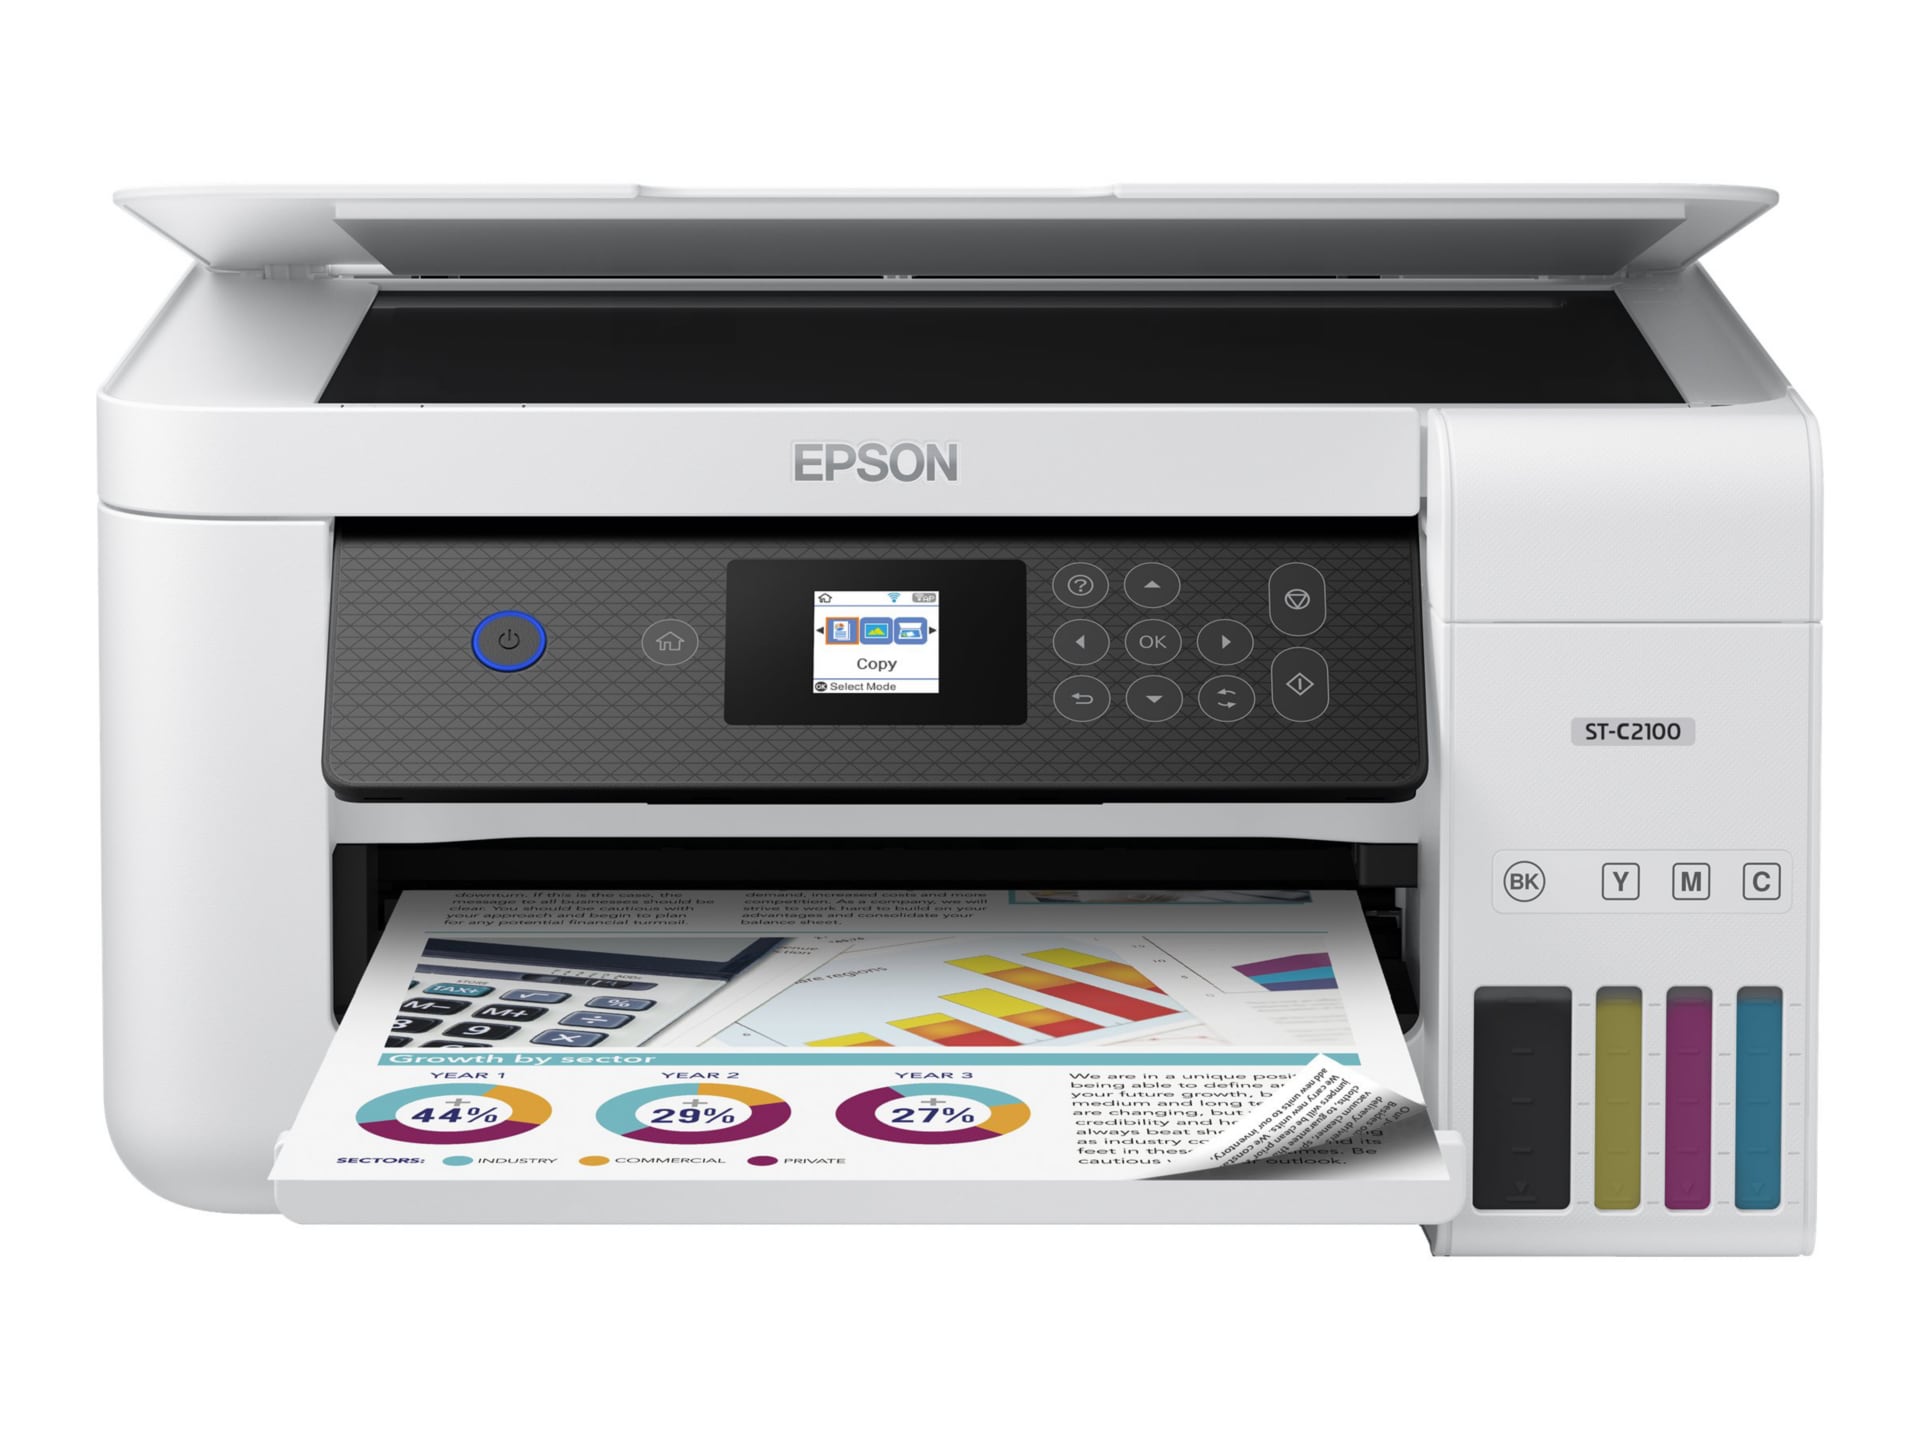 Loading oversized paper into your Epson wf7720 